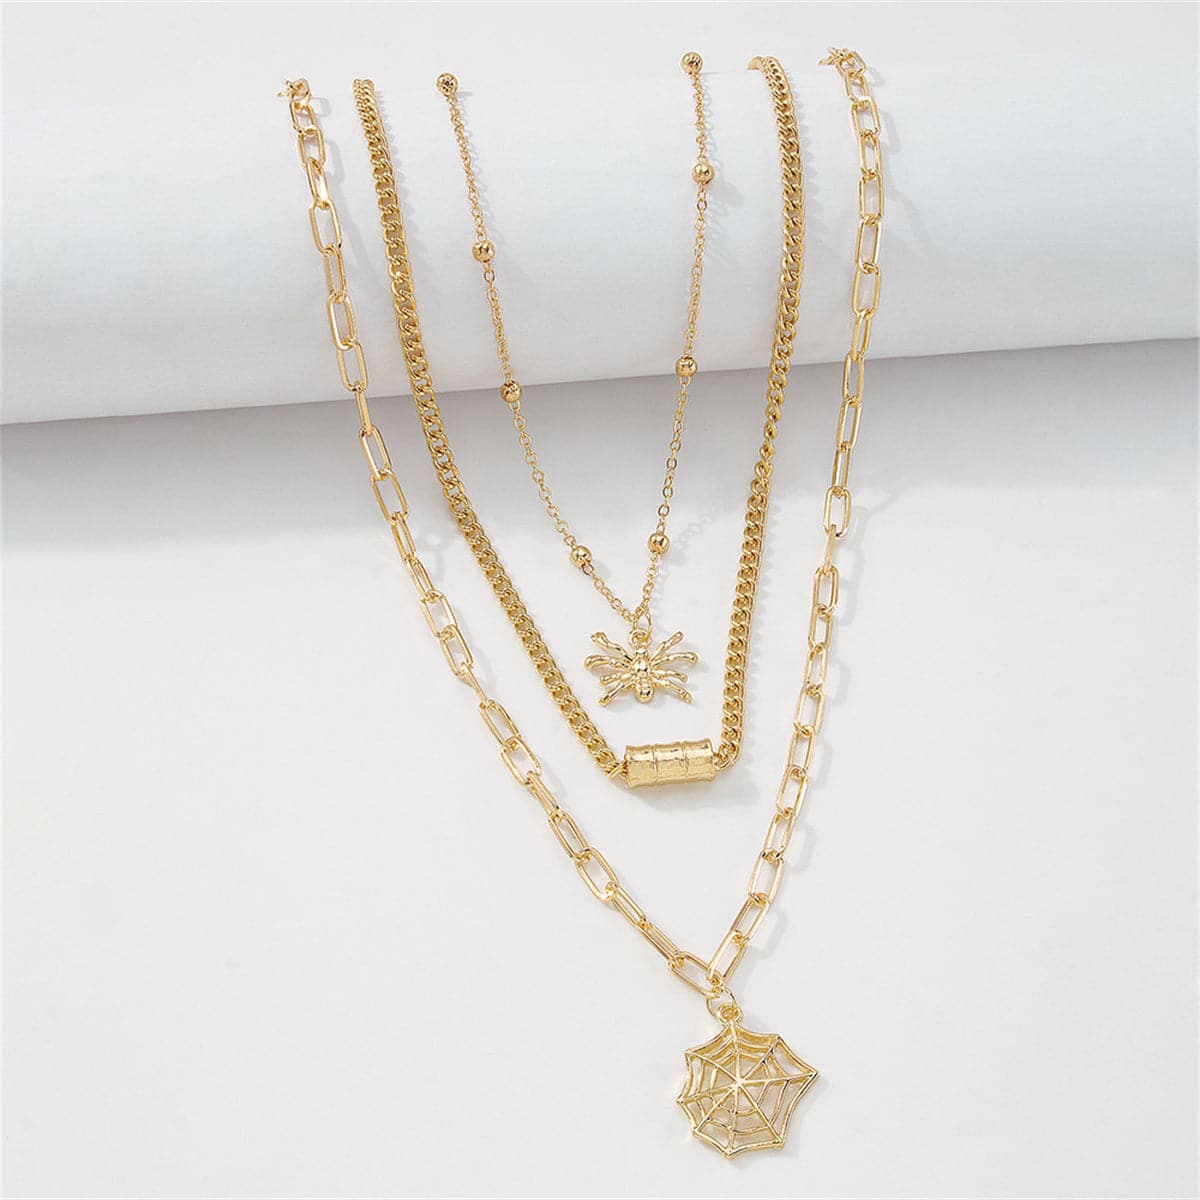 18K Gold-Plated Spider Cobweb Layered Pendant Necklace